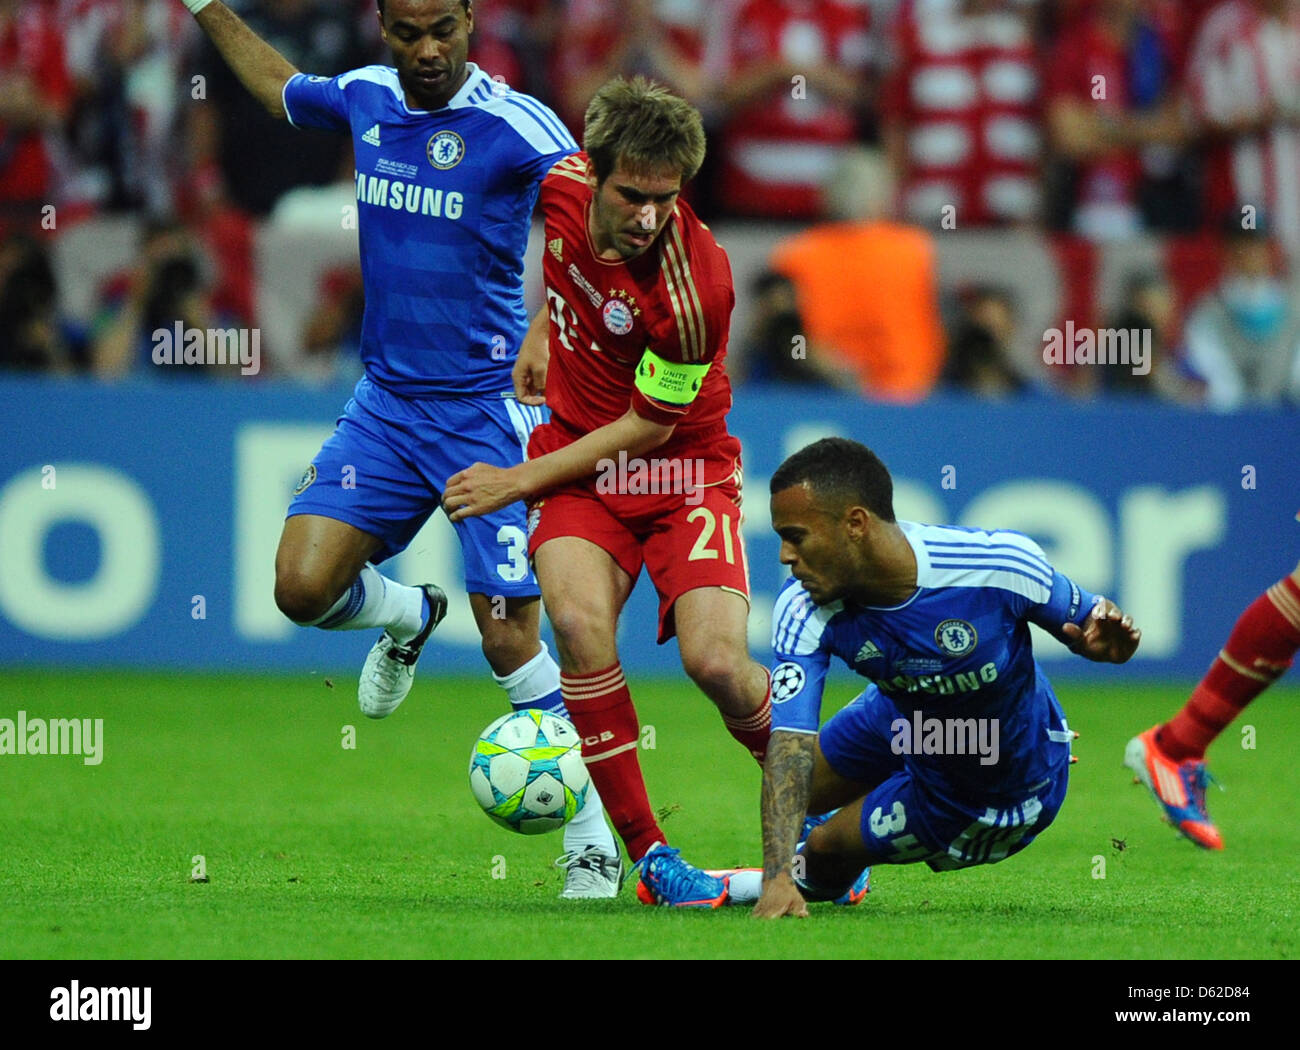 Munich's Philipp Lahm (C) and Chelsea's Ashley Cole (L) and Ryan Bertrand (R) vie for the ball during the UEFA Champions League soccer final between FC Bayern Munich and FC Chelsea at Fußball Arena München in Munich, Germany, 19 May 2012. Photo: Thomas Eisenhuth dpa/lby  +++(c) dpa - Bildfunk+++ Stock Photo